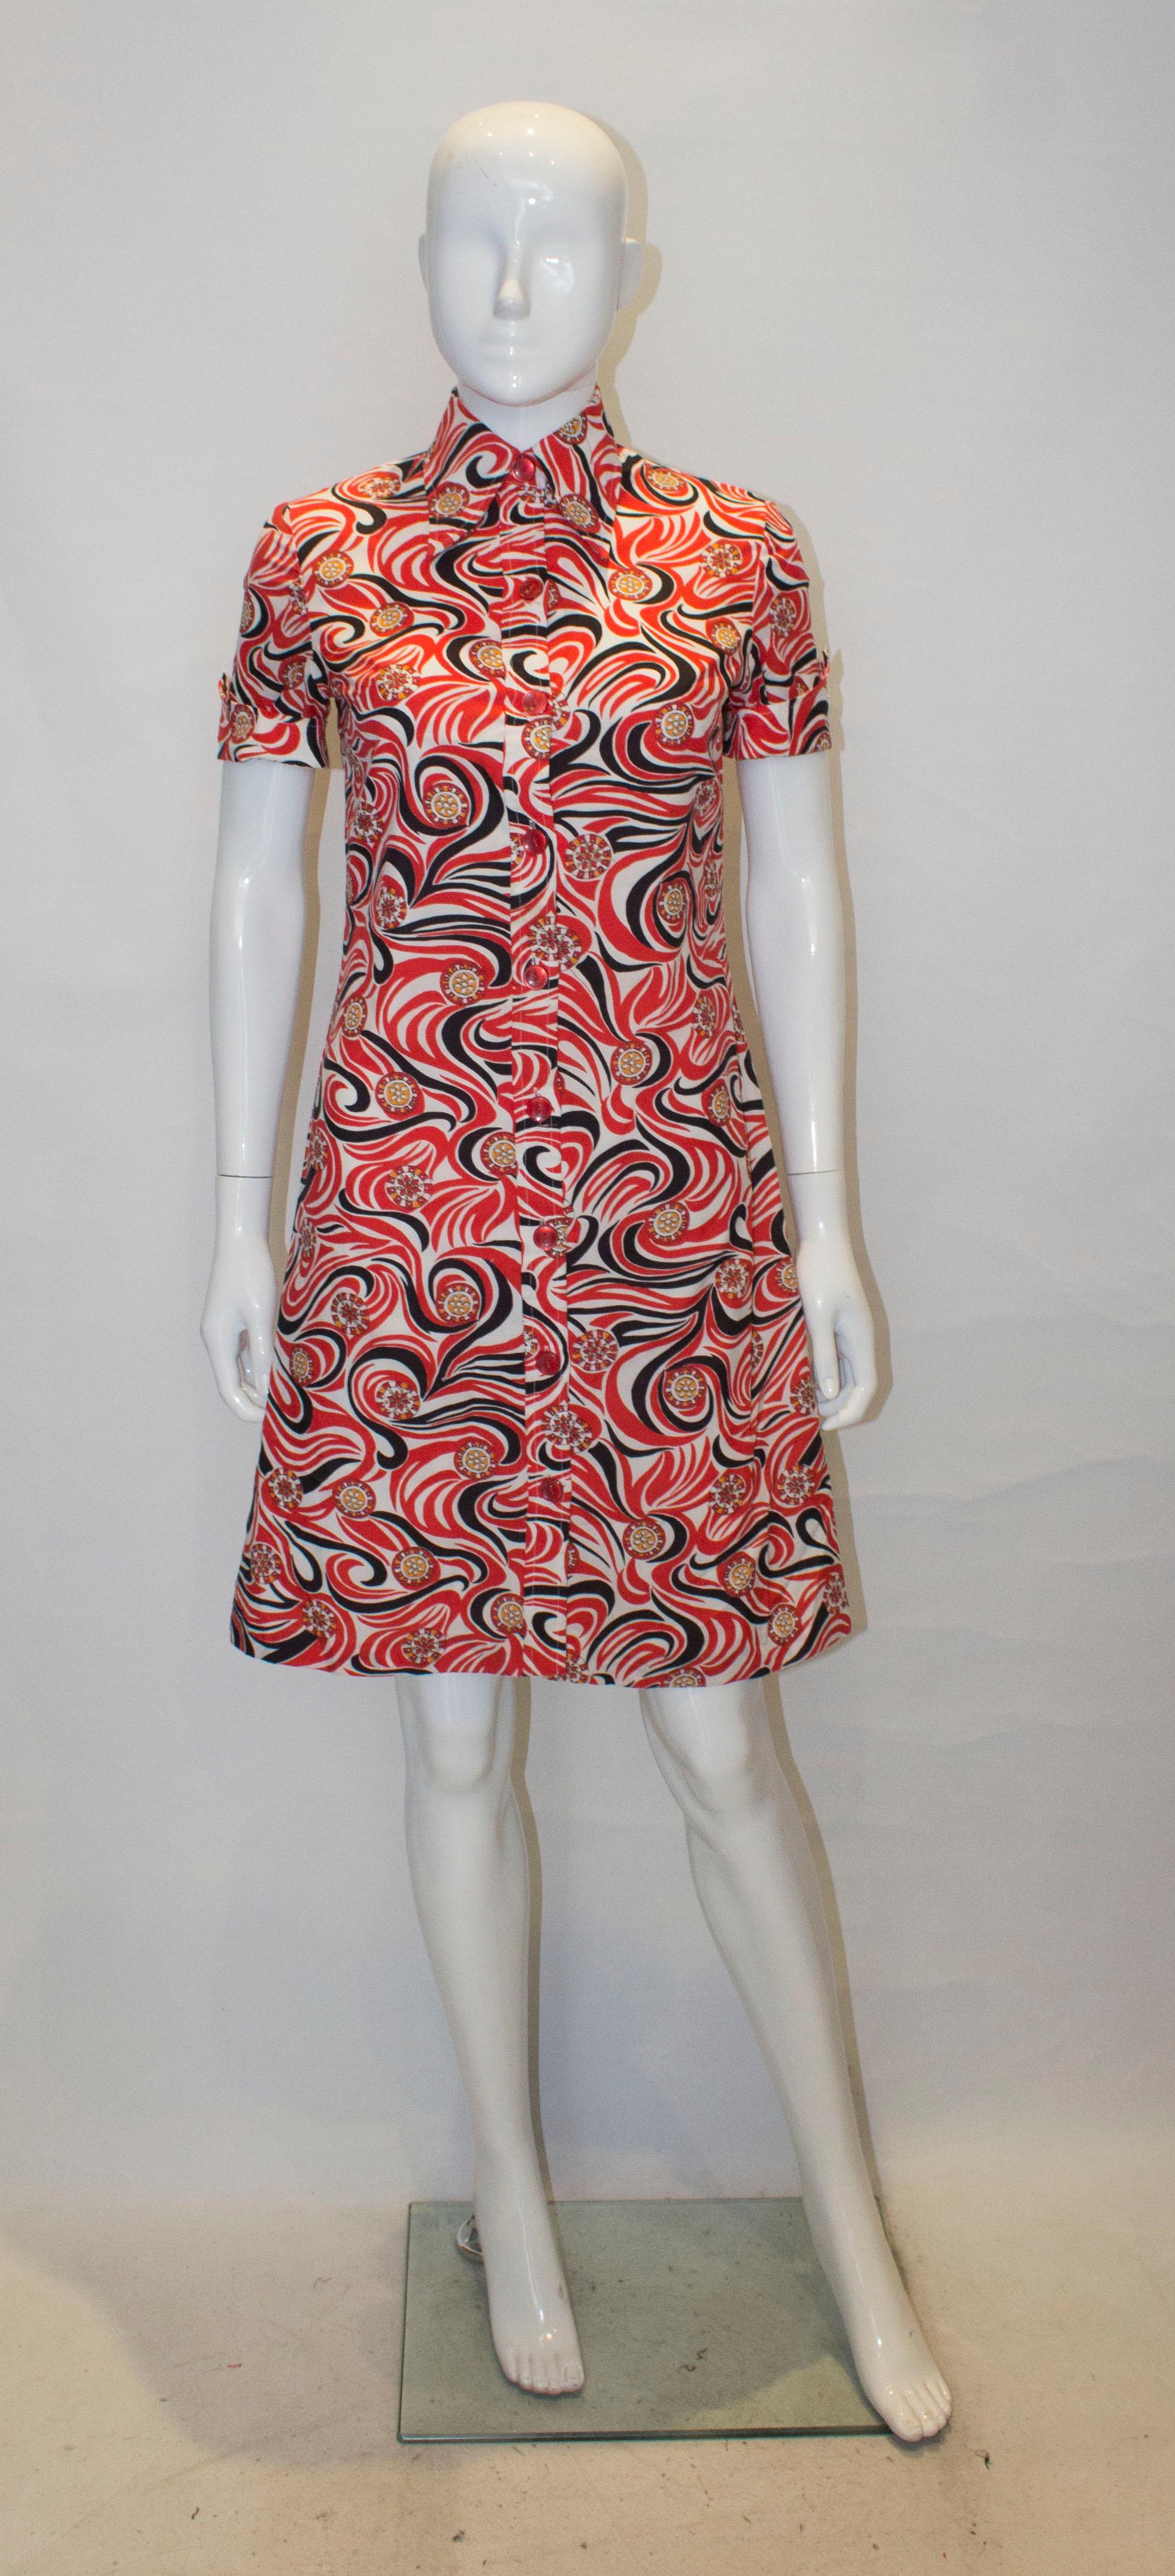 A vintage C & A shirt dress in a wonderful print of red, white , black and orange. The dress is fully lined, has a nine button opening and short sleaves.